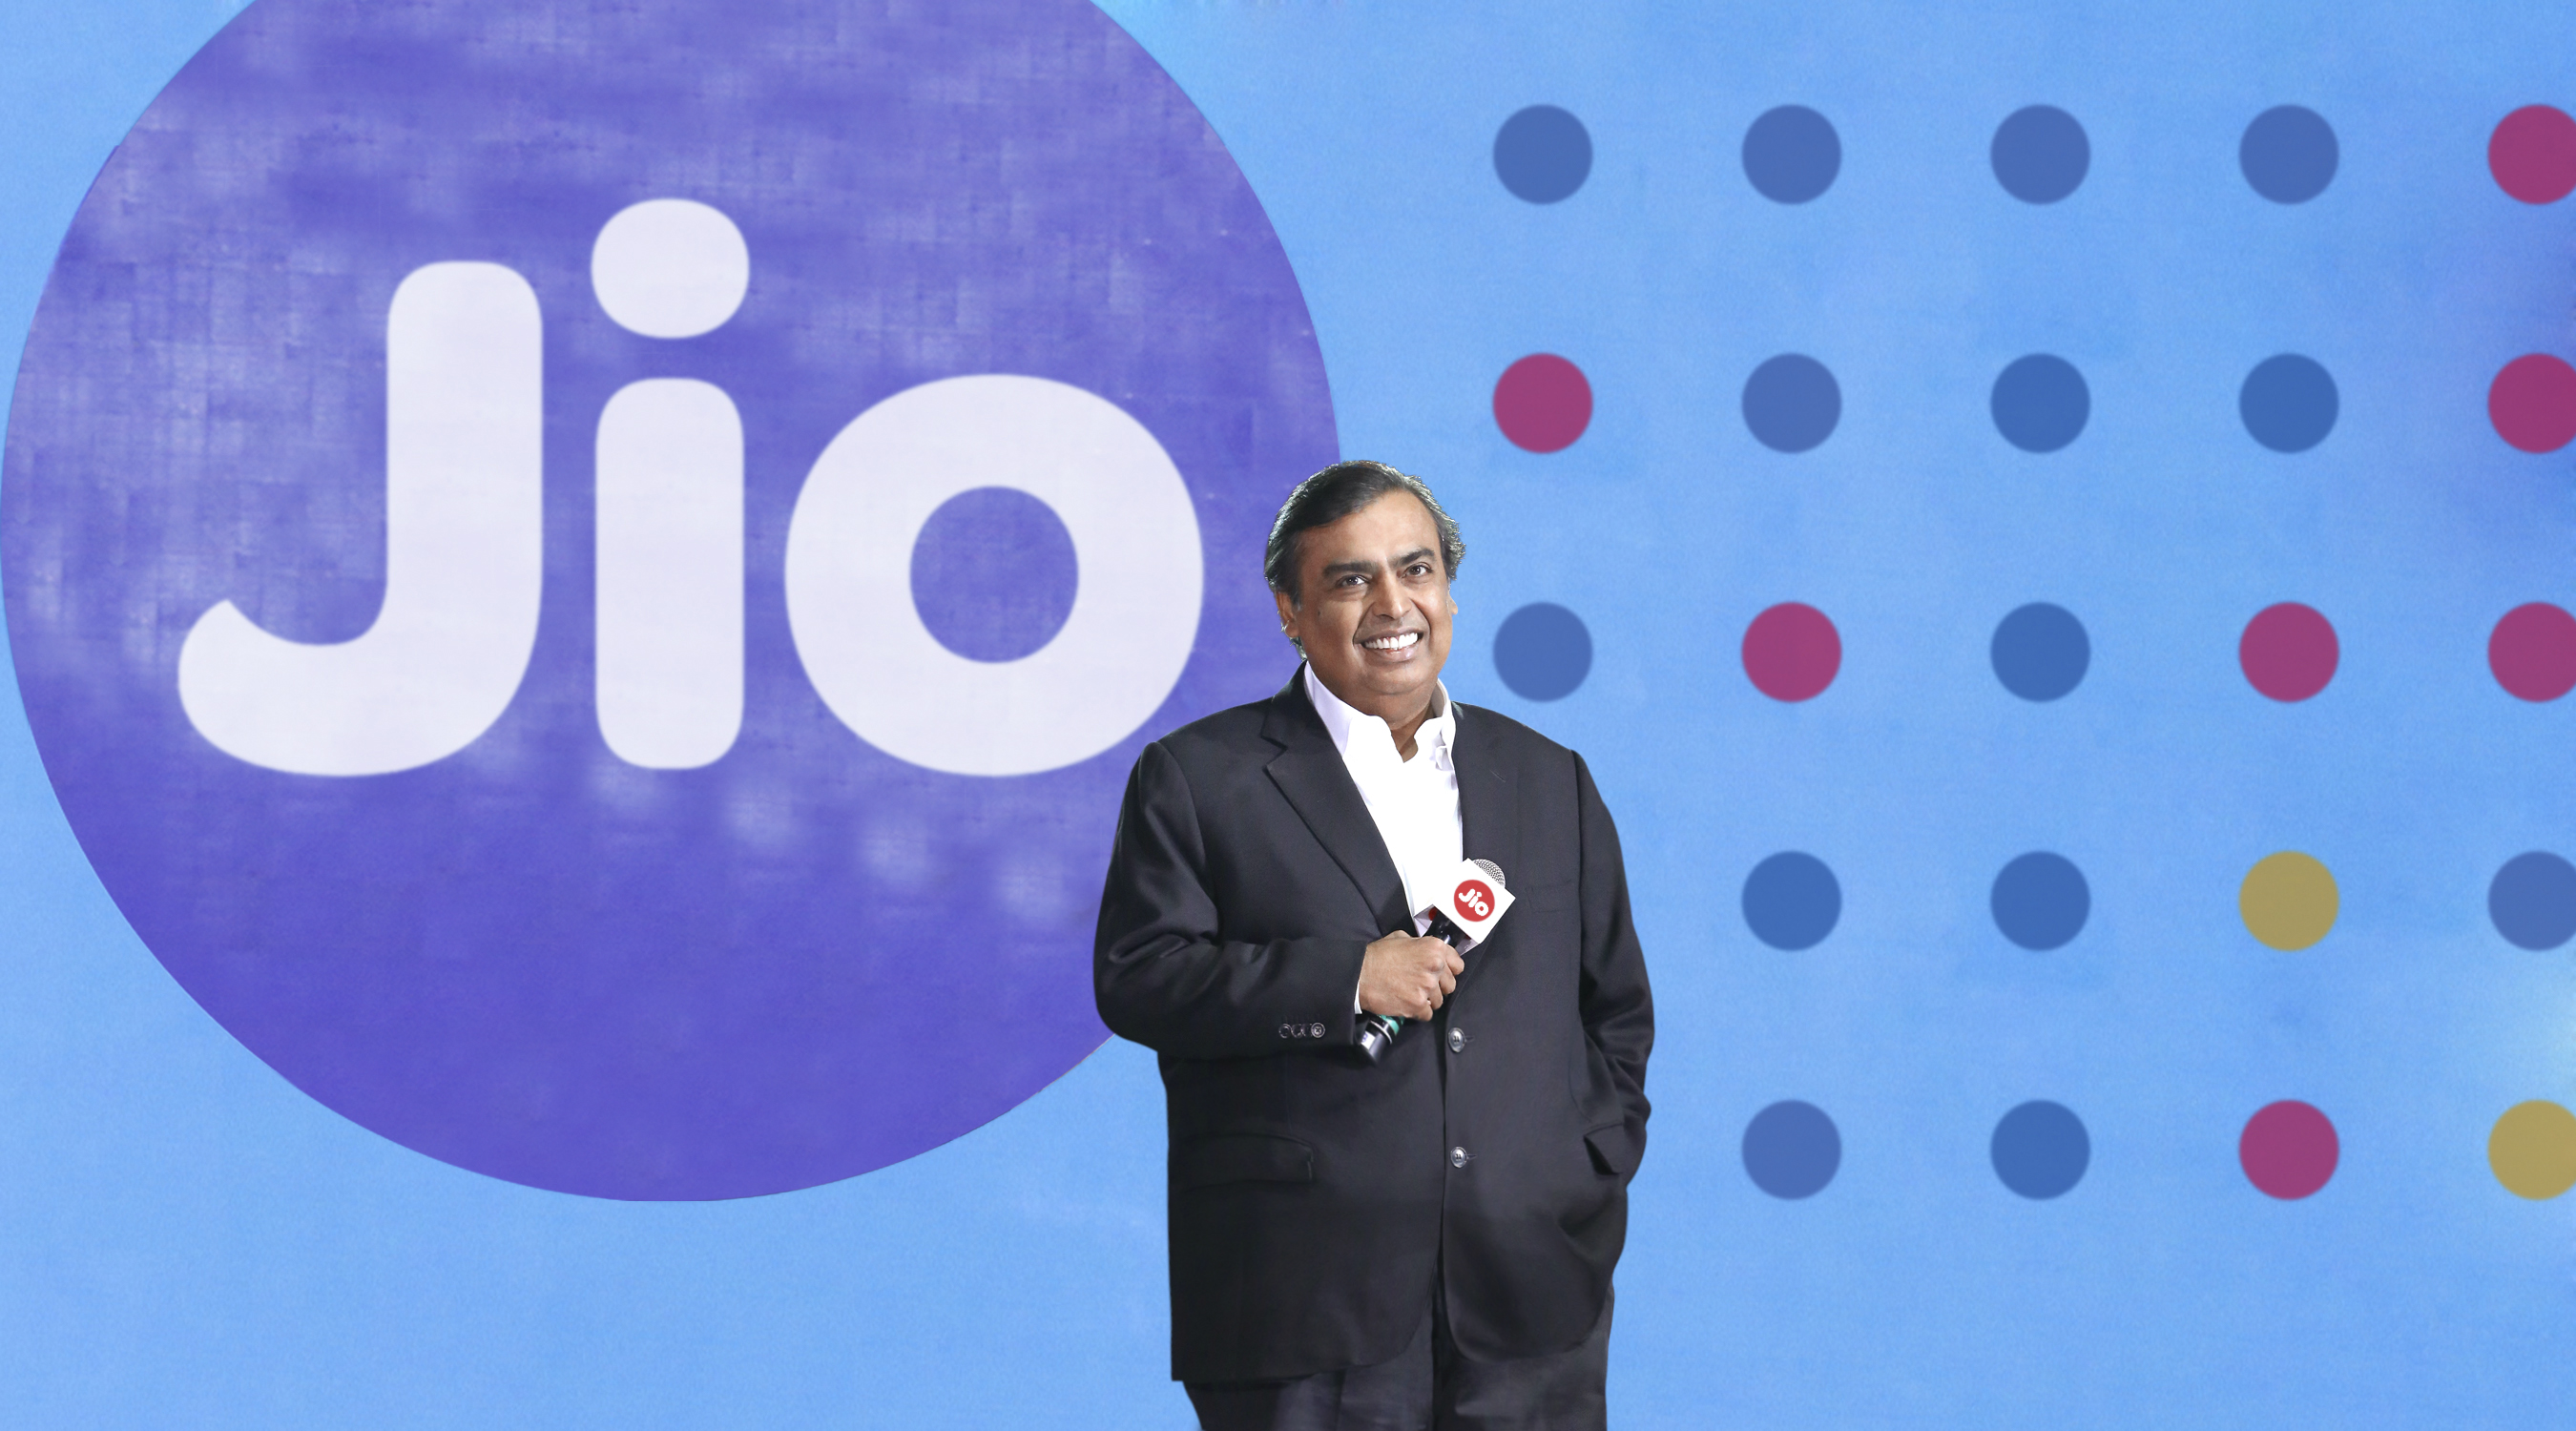 Mukesh Ambani, the CEO of Reliance Industries announced that Reliance Jio will provide fastest internet service in India